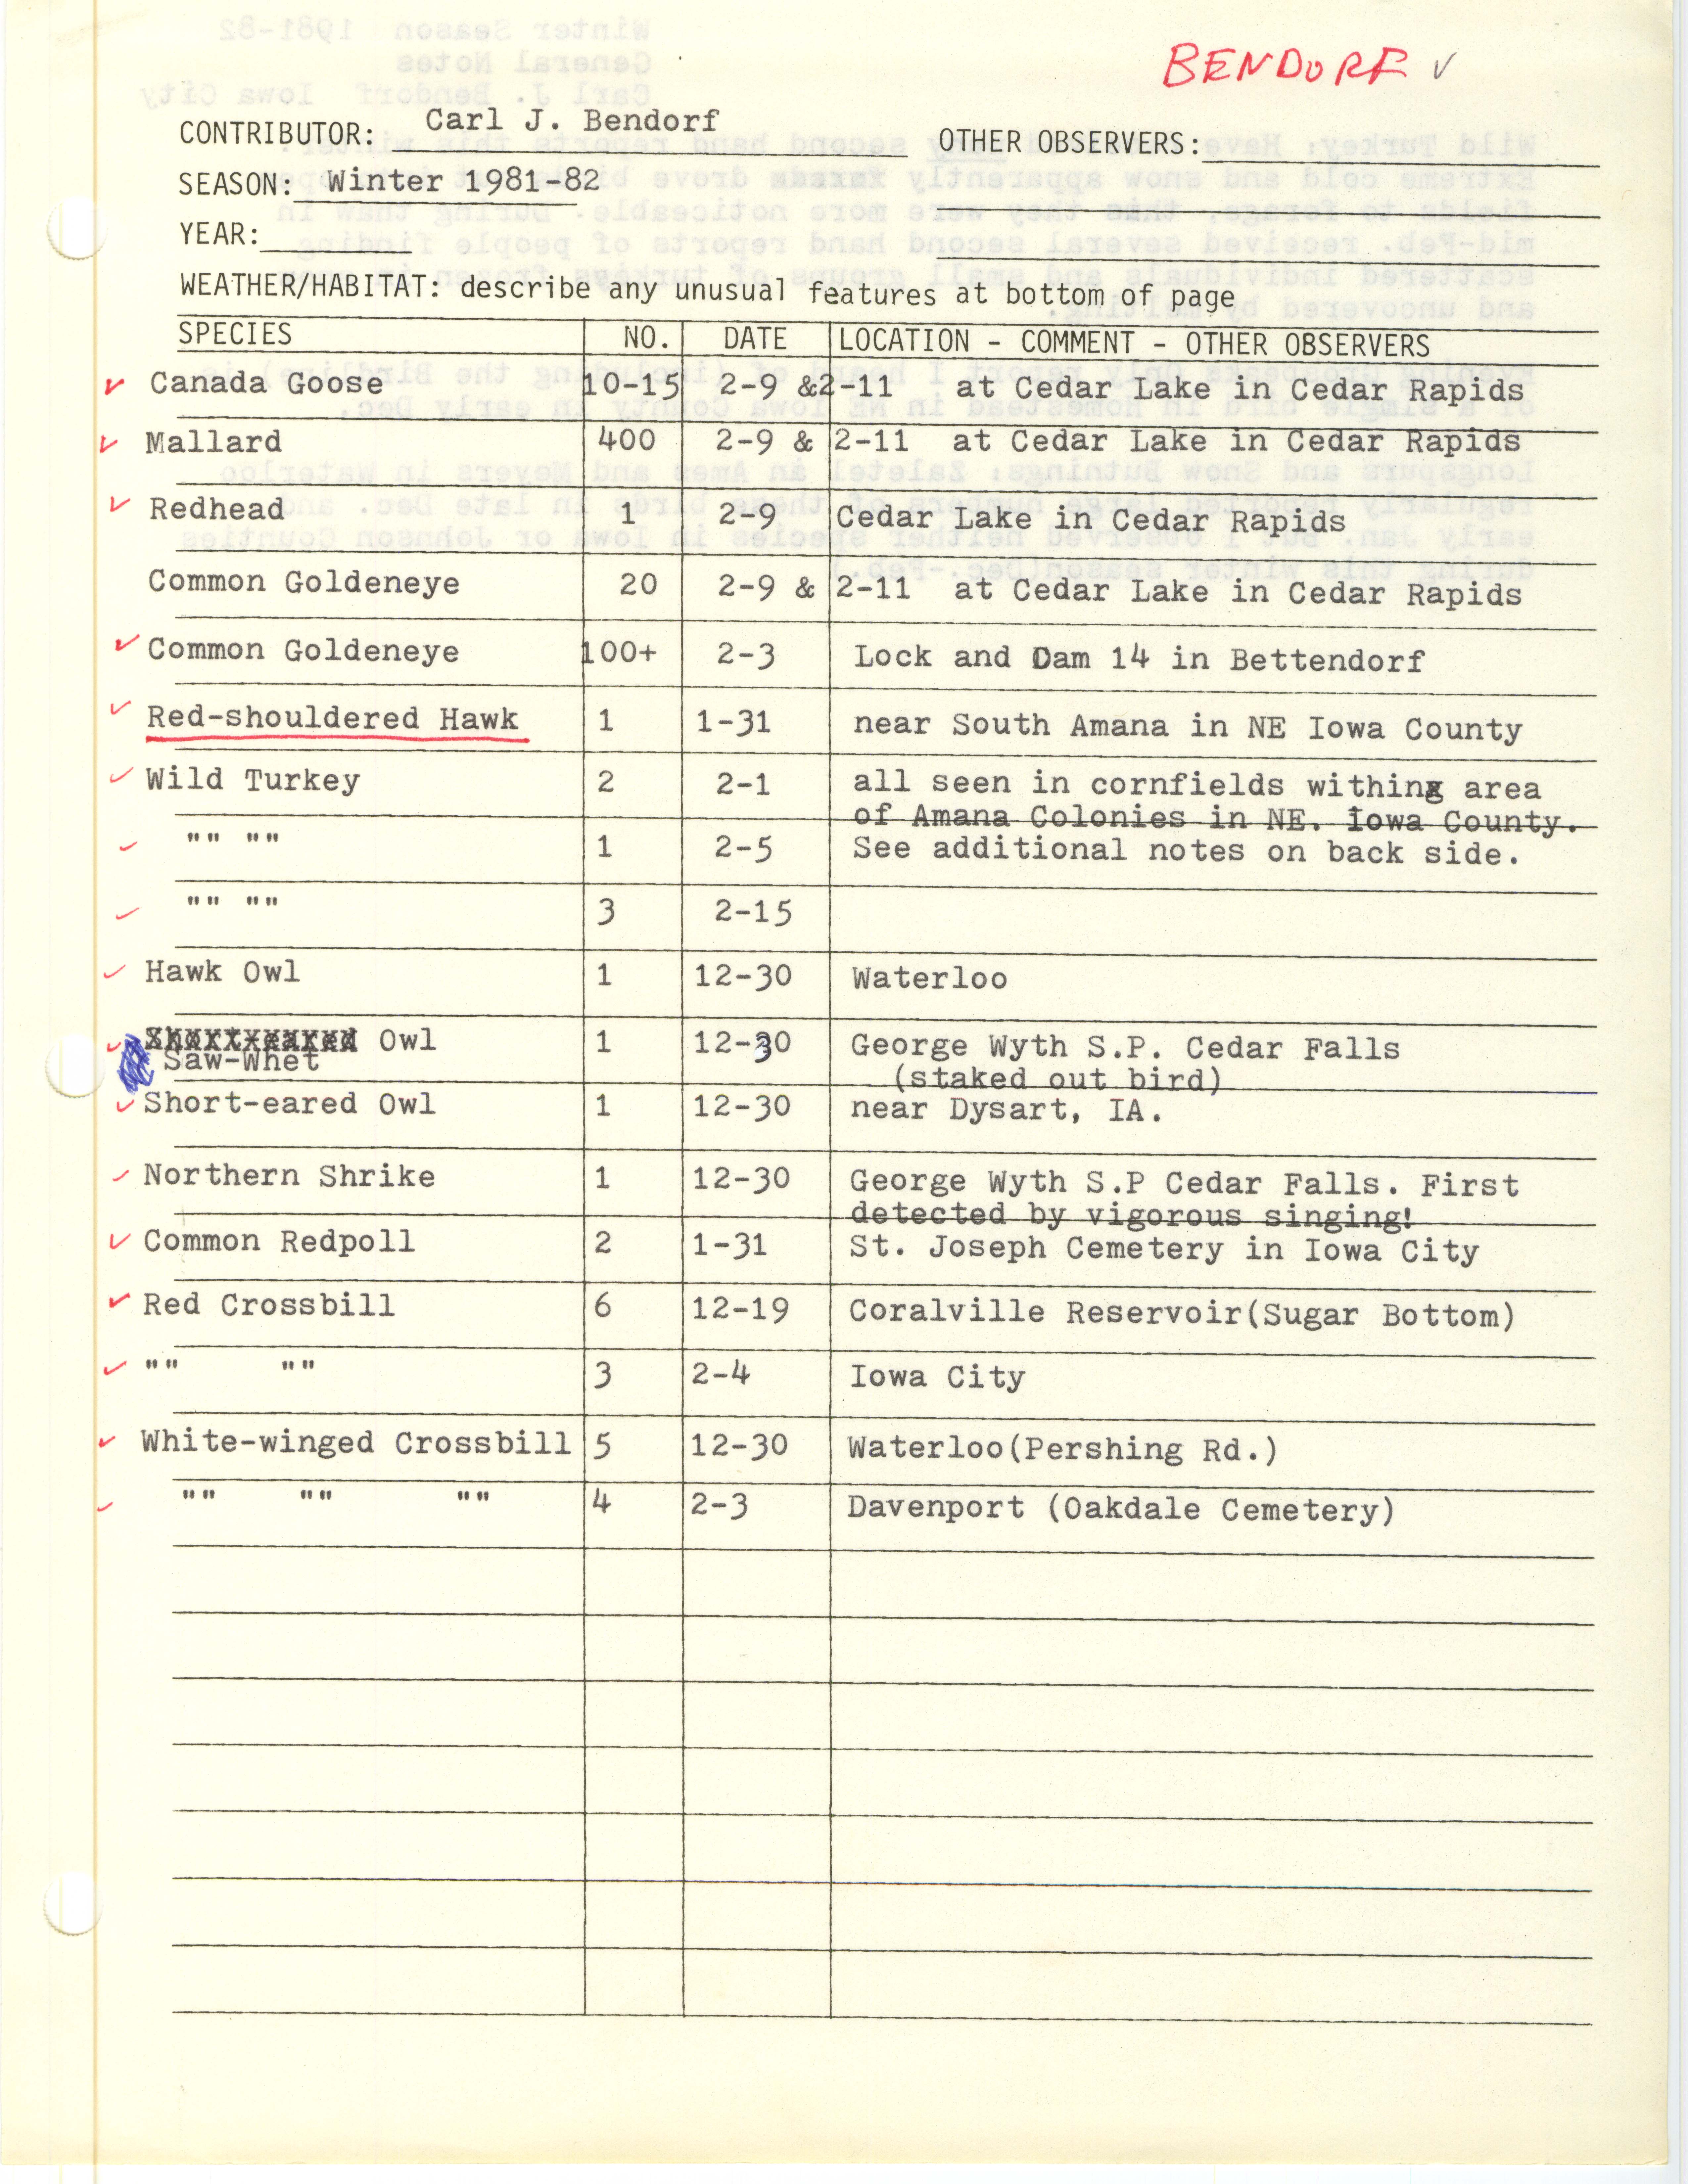 Field notes contributed by Carl J. Bendorf, winter 1981-1982